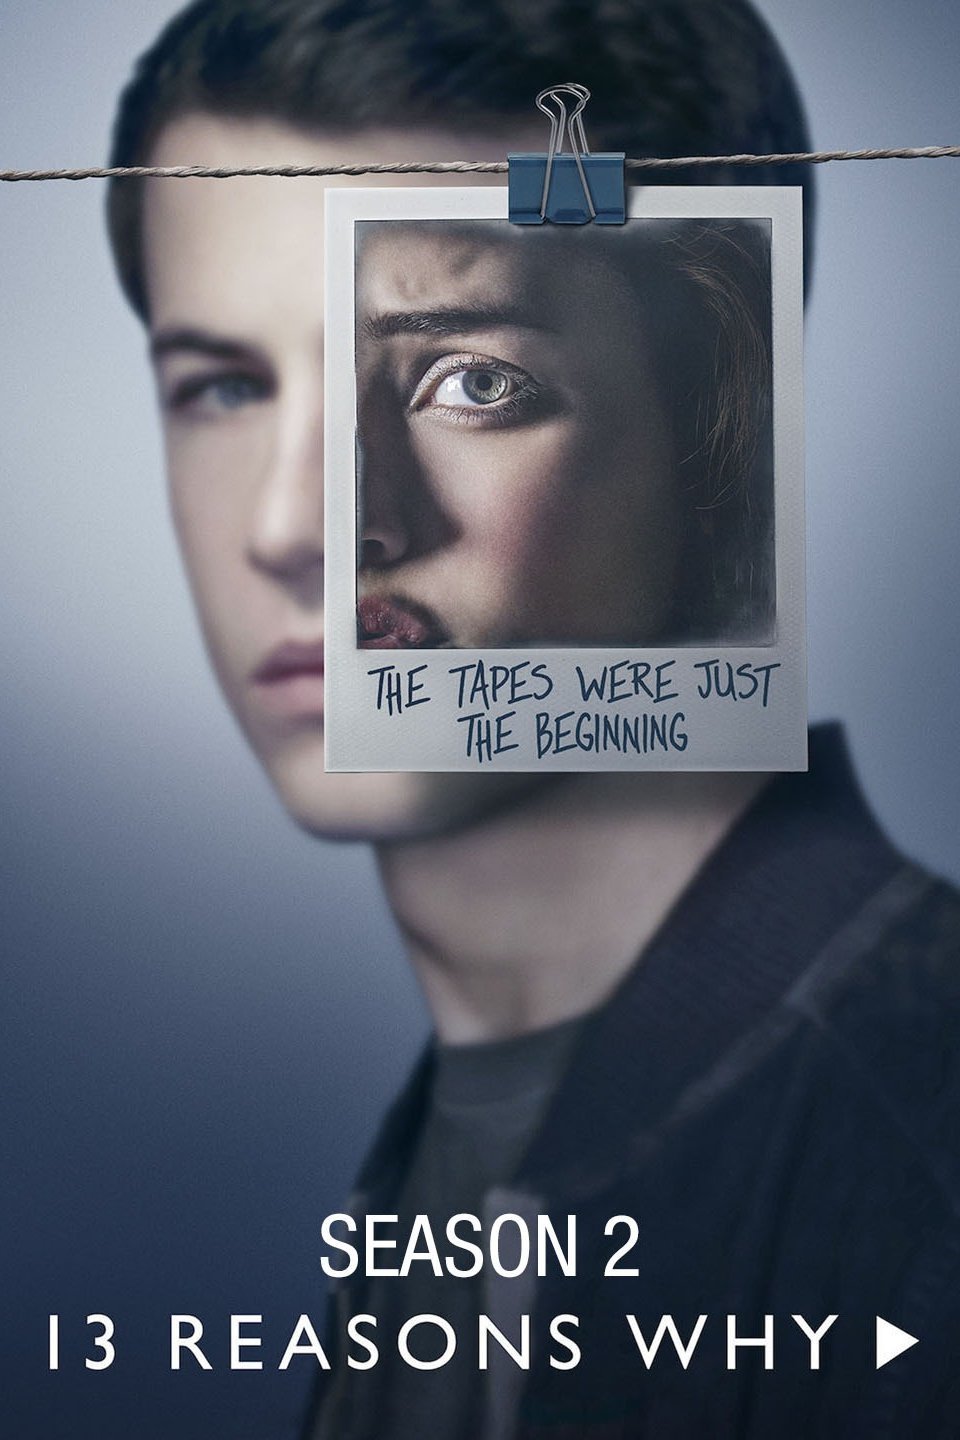 13 reasons why 2 ccast